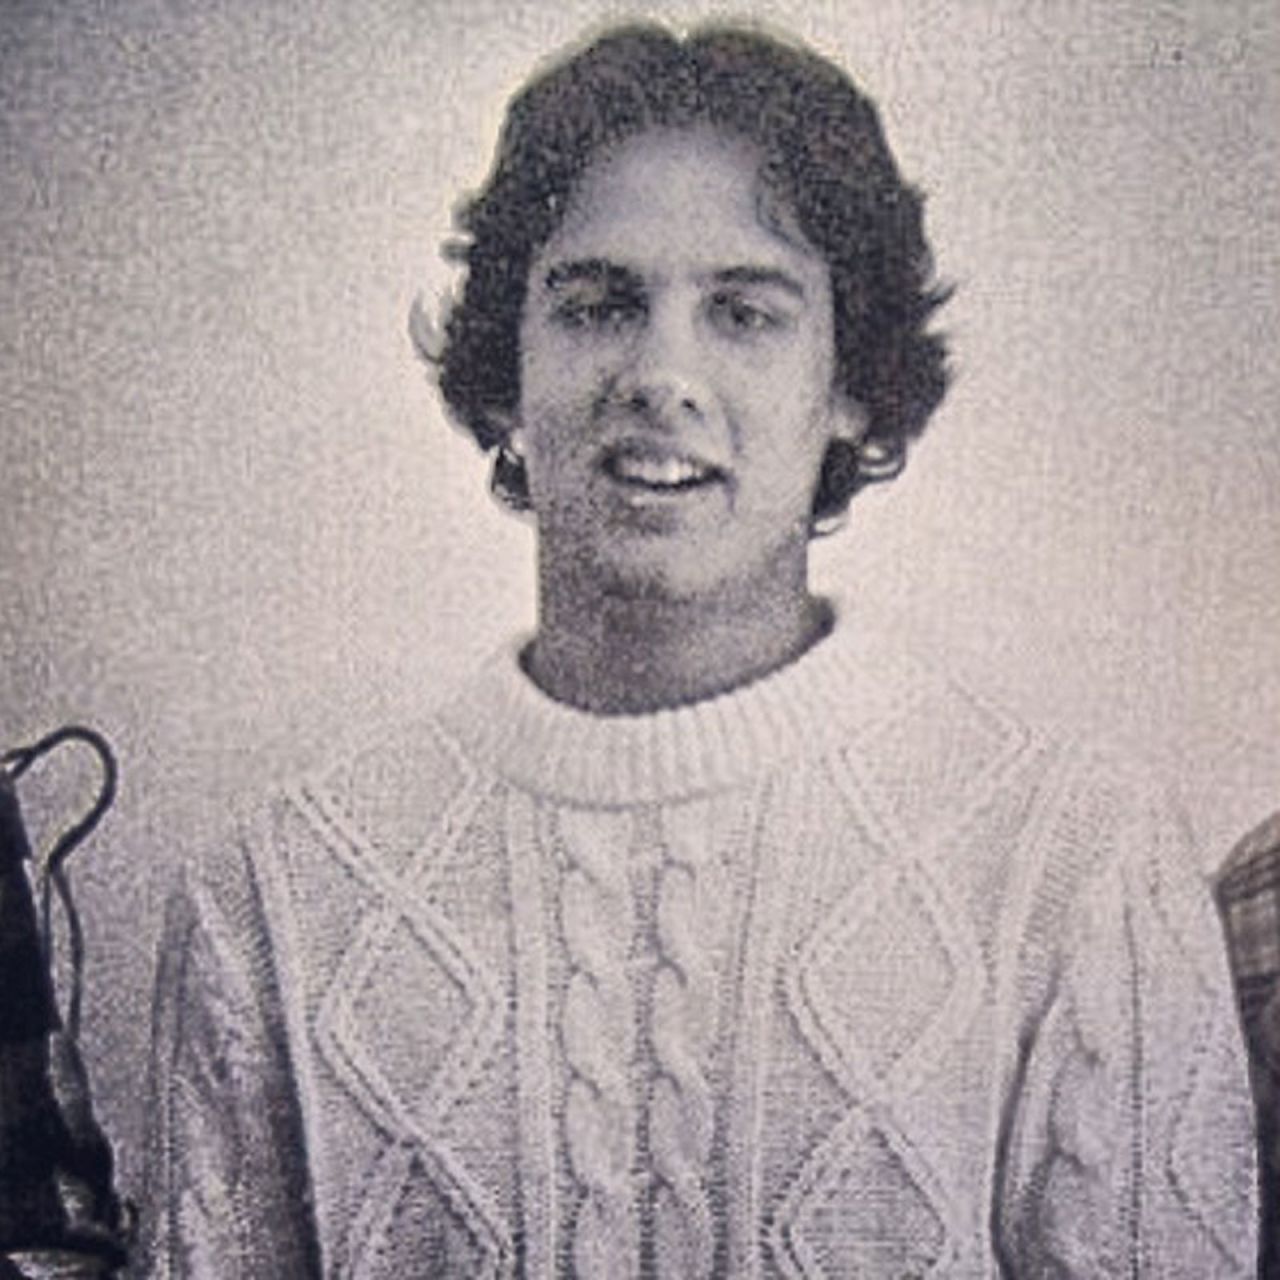 "A friend of mine from high school dug up this old pic - look at that sweater (and hair)!" <a href="https://www.instagram.com/p/dCvuBmTeia/" target="_blank" target="_blank">Christie wrote on Instagram</a>.